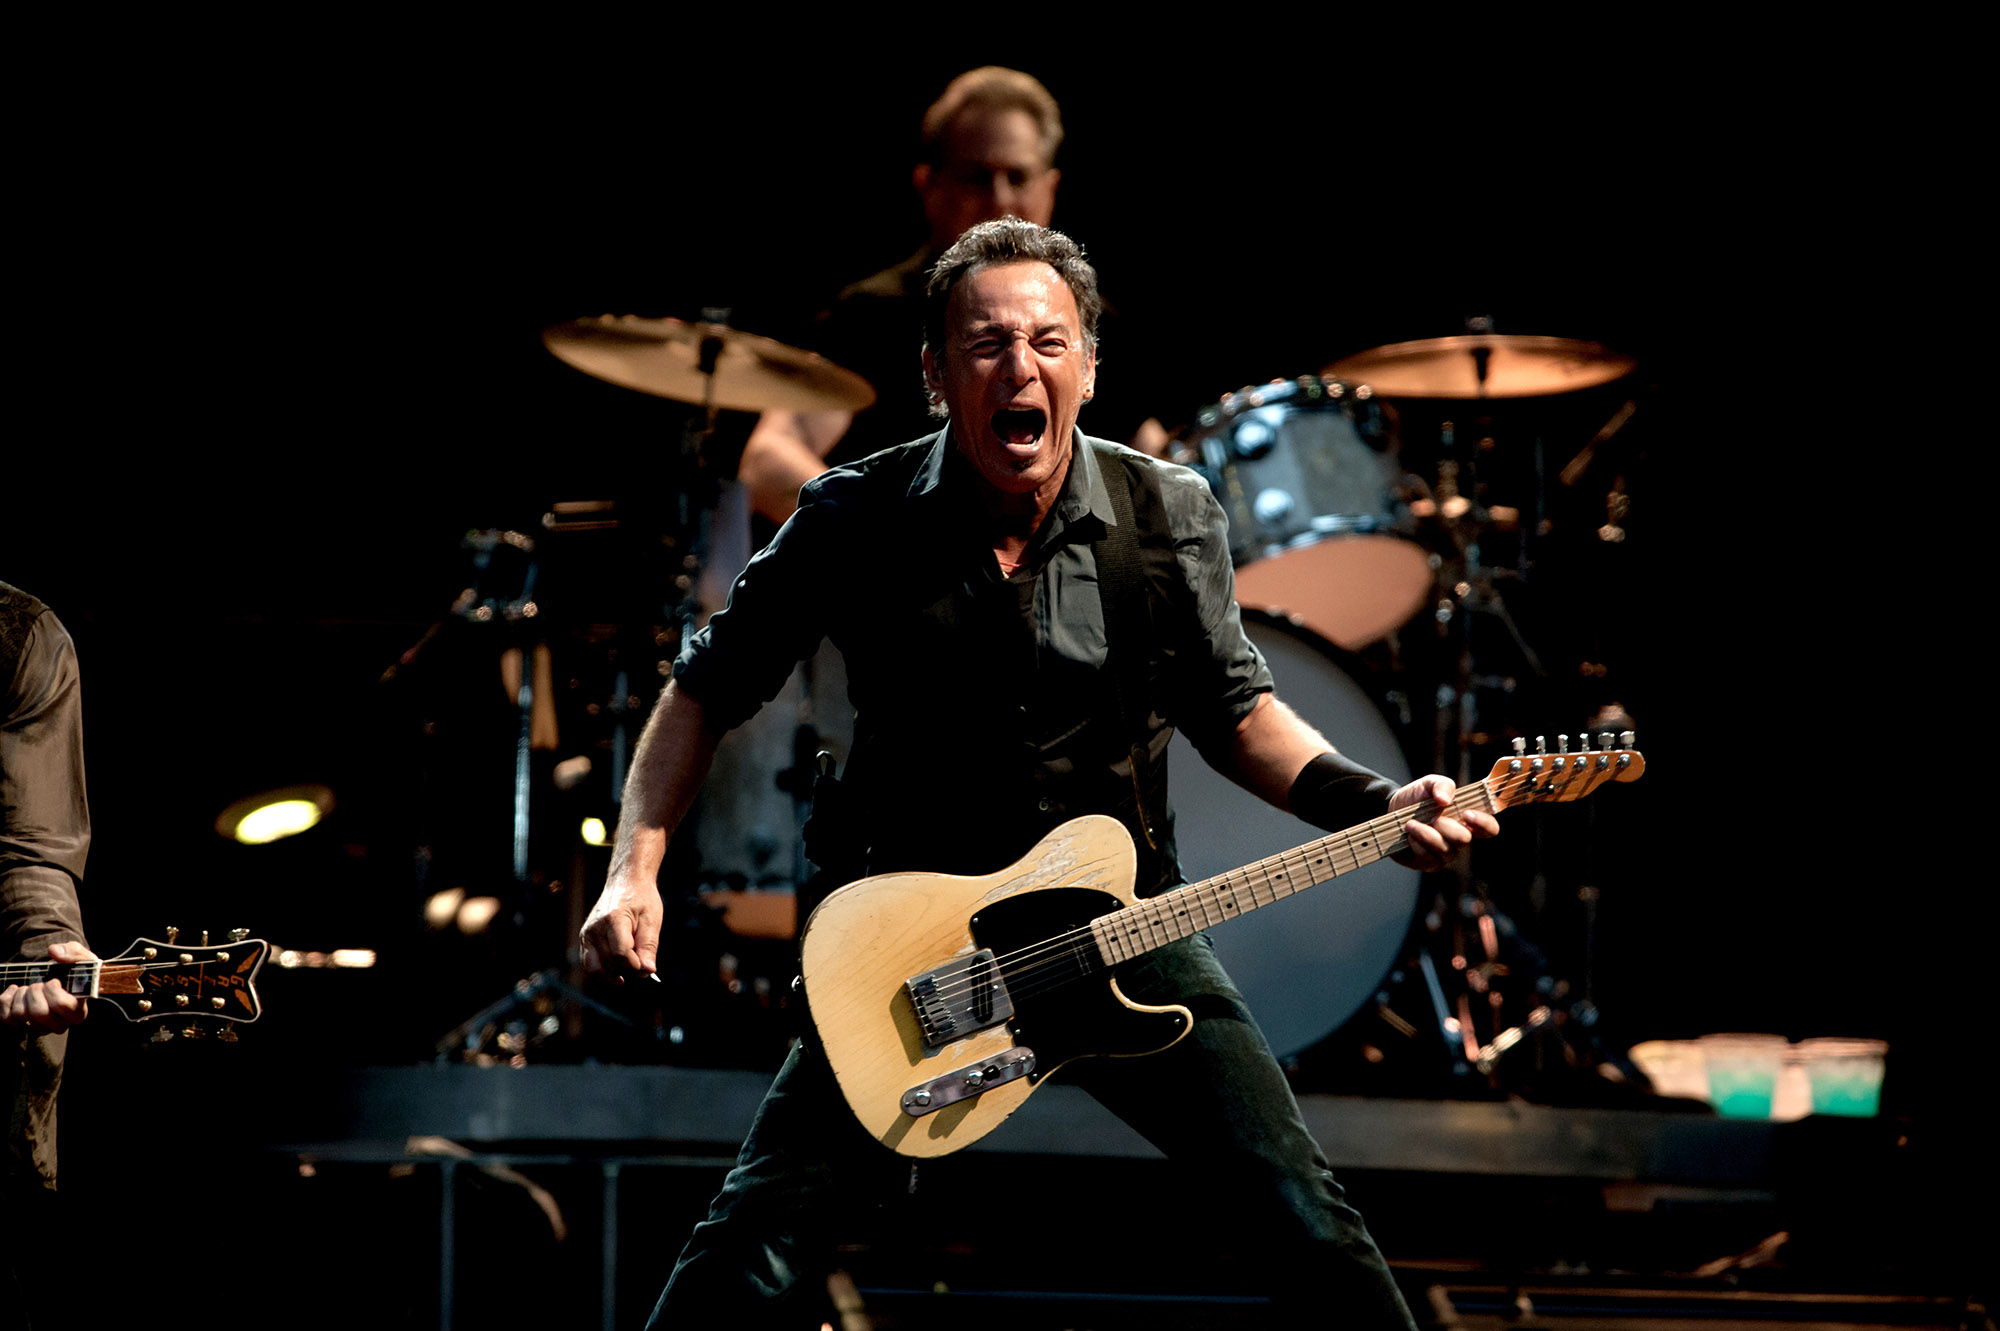 Milan Italy, 07 June 2012,  live concert of Bruce Springsteen & The E-Street Band at the San Siro Stadium: The singer Bruce Springsteen during the concert